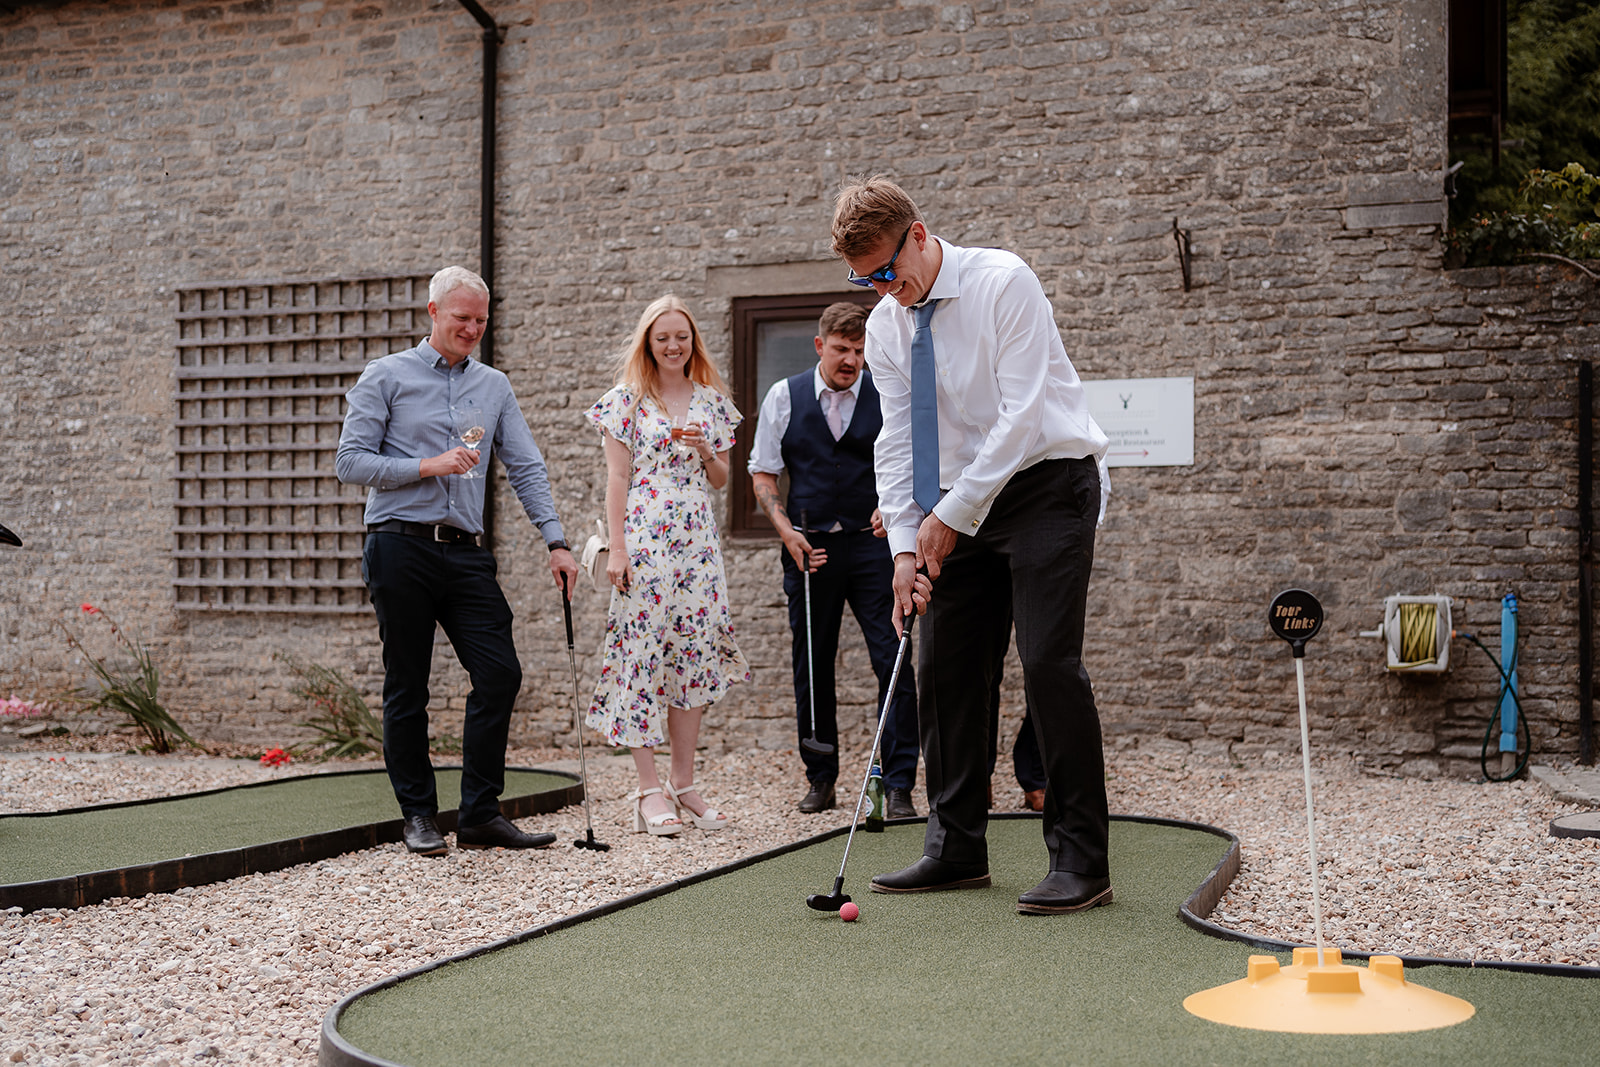 Wedding guests play crazy golf at Kingston Country Courtyard